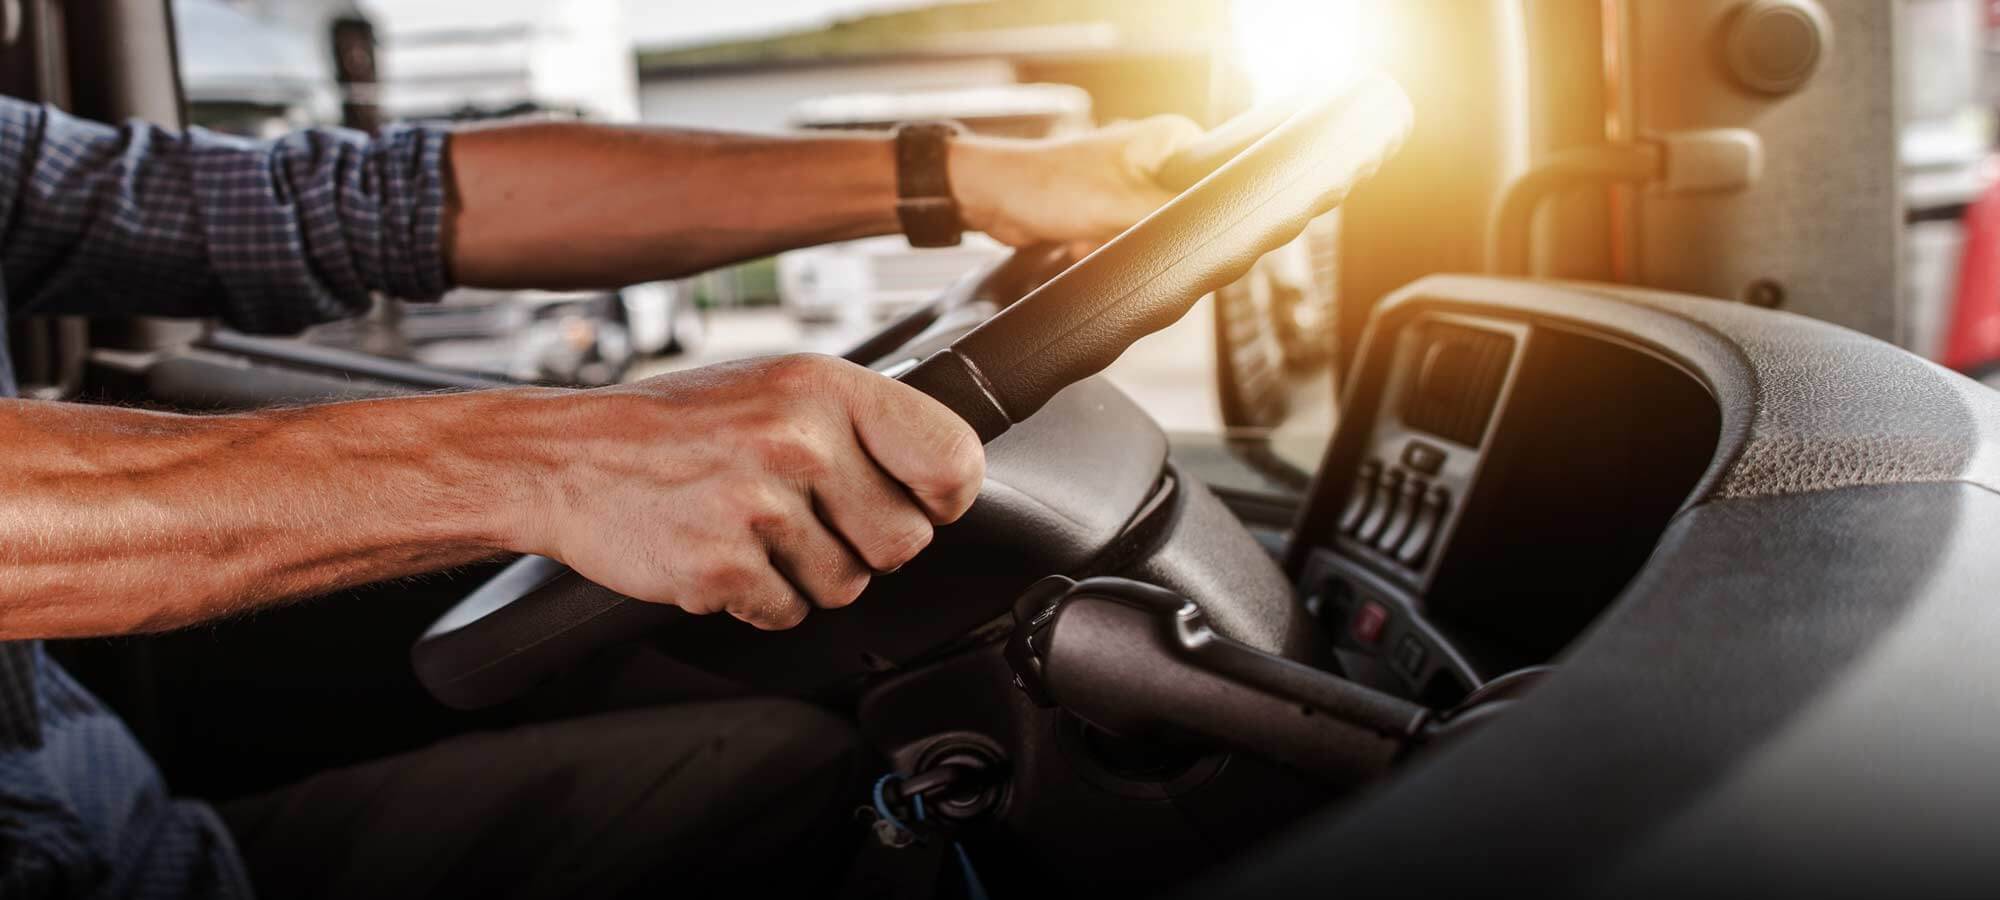 Close up photo of a truck drivers hands on the steering wheel of a semi tractor